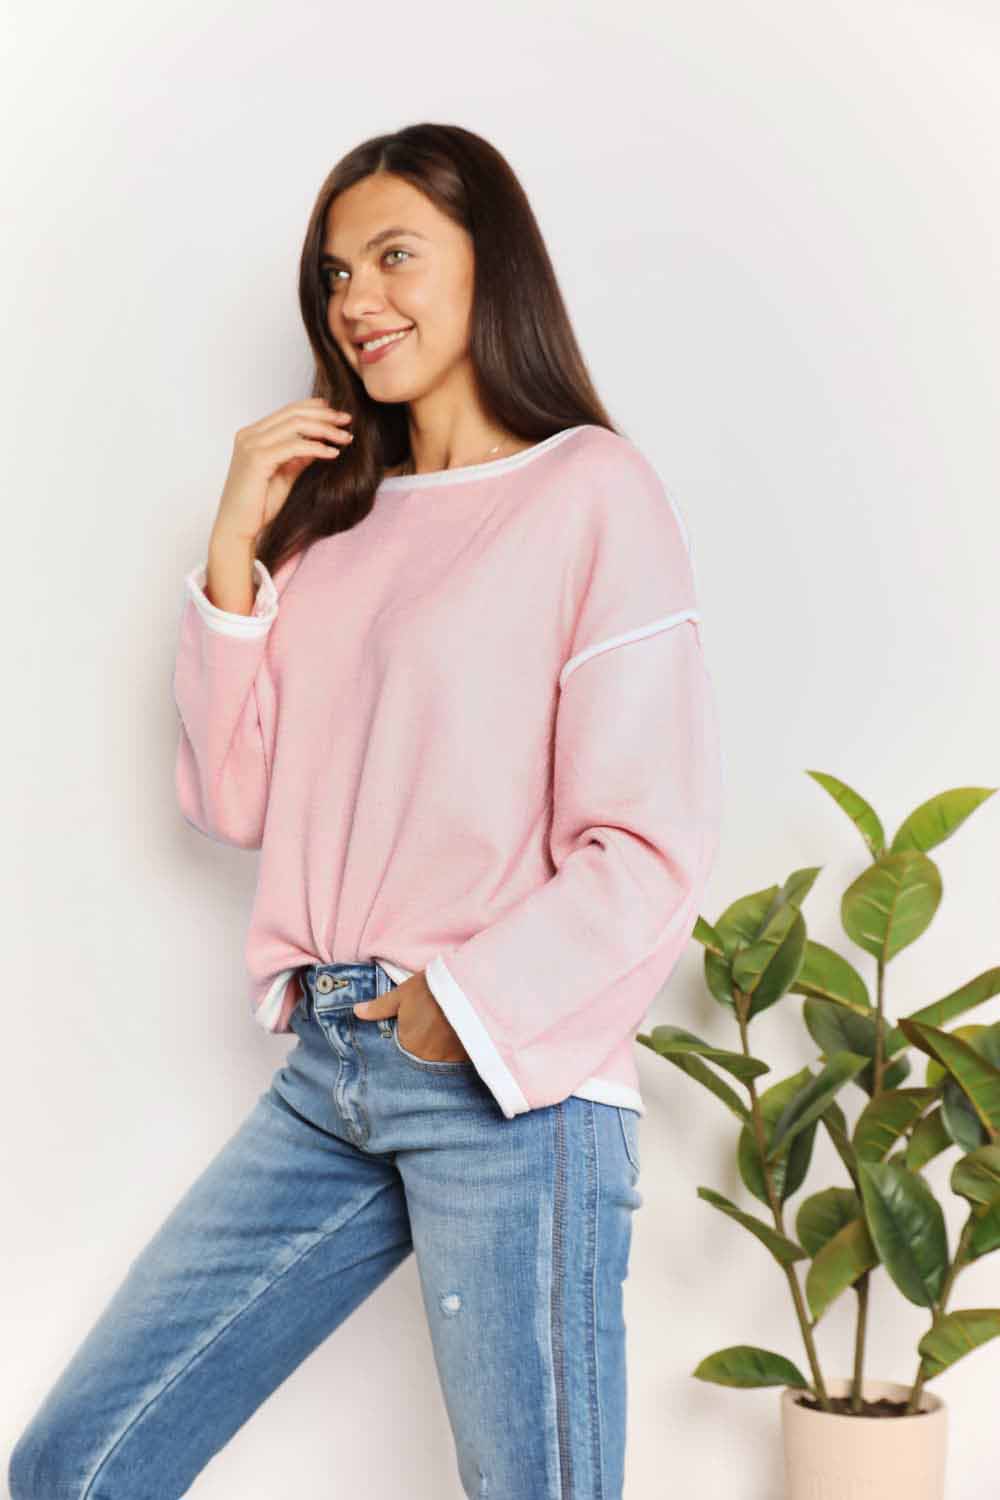 Double Take Contrast Detail Dropped Shoulder Knit Top - Tigbuls Variety Fashion